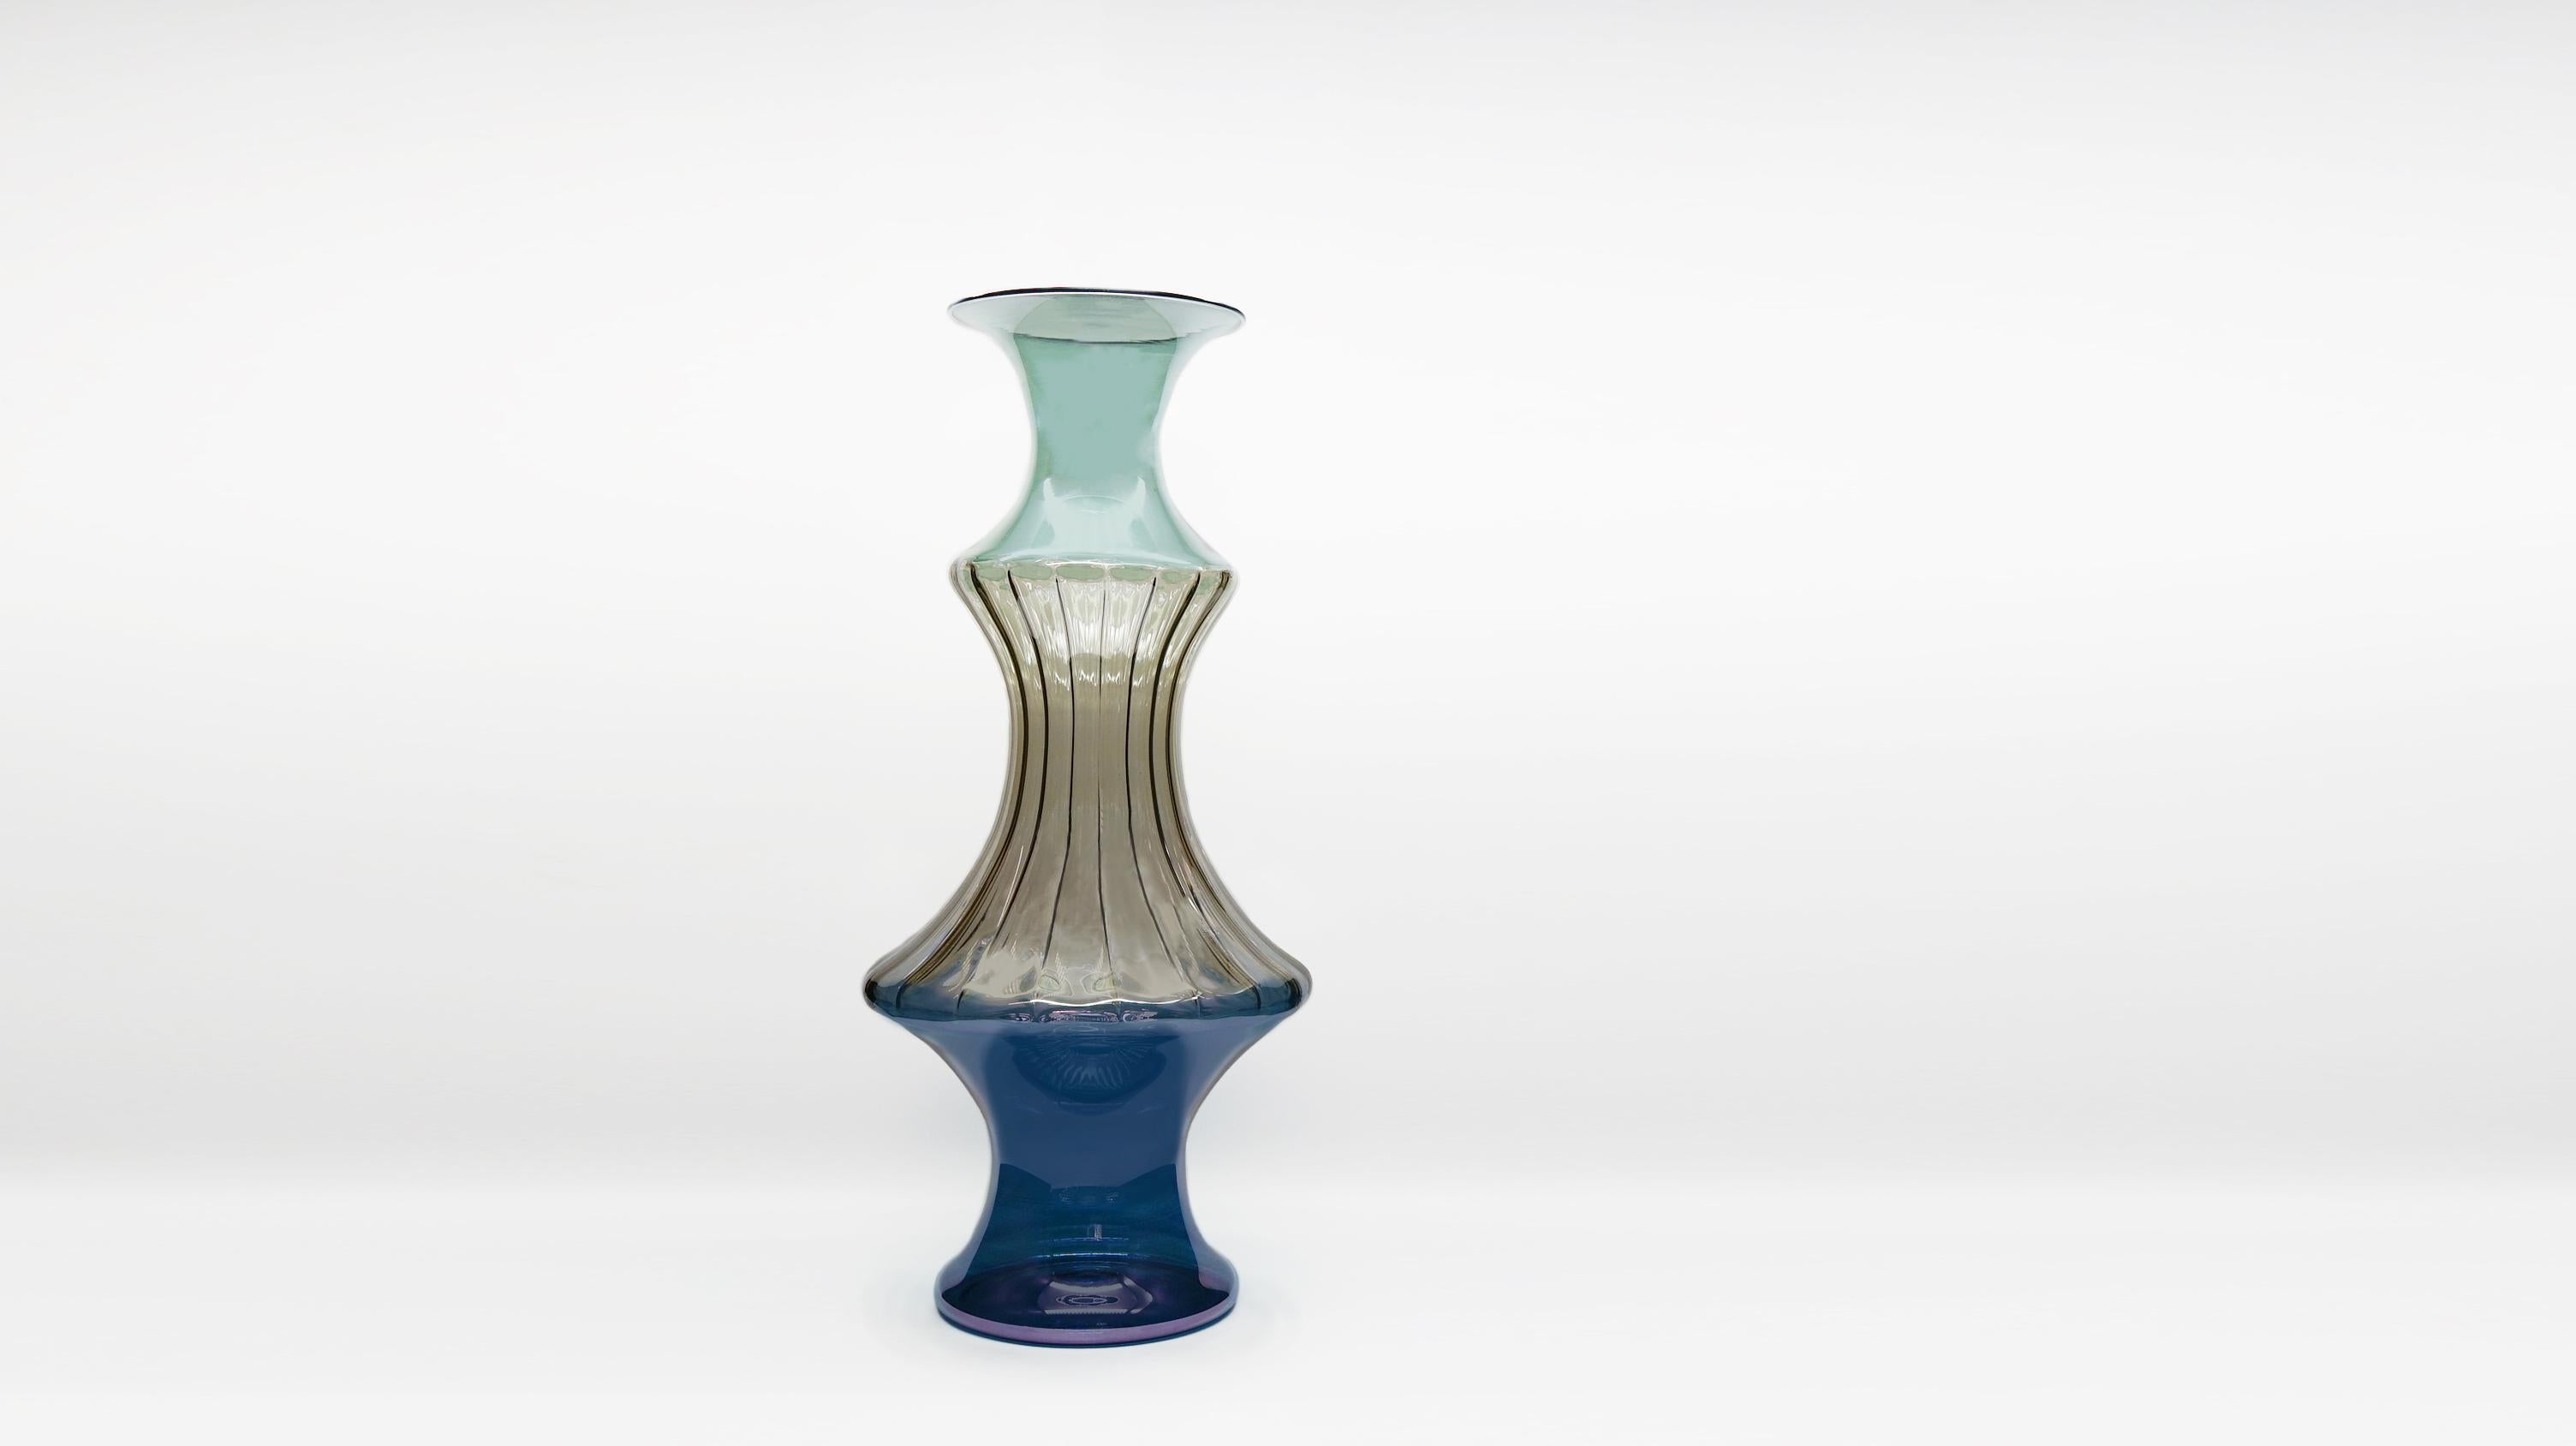 The Madame vase reinterprets traditional Venetian vases, the refined details and delicate colors.
The design stems from the repetition of the typical flaring , which repeated with careful breakdown and composition creates shapes that are always